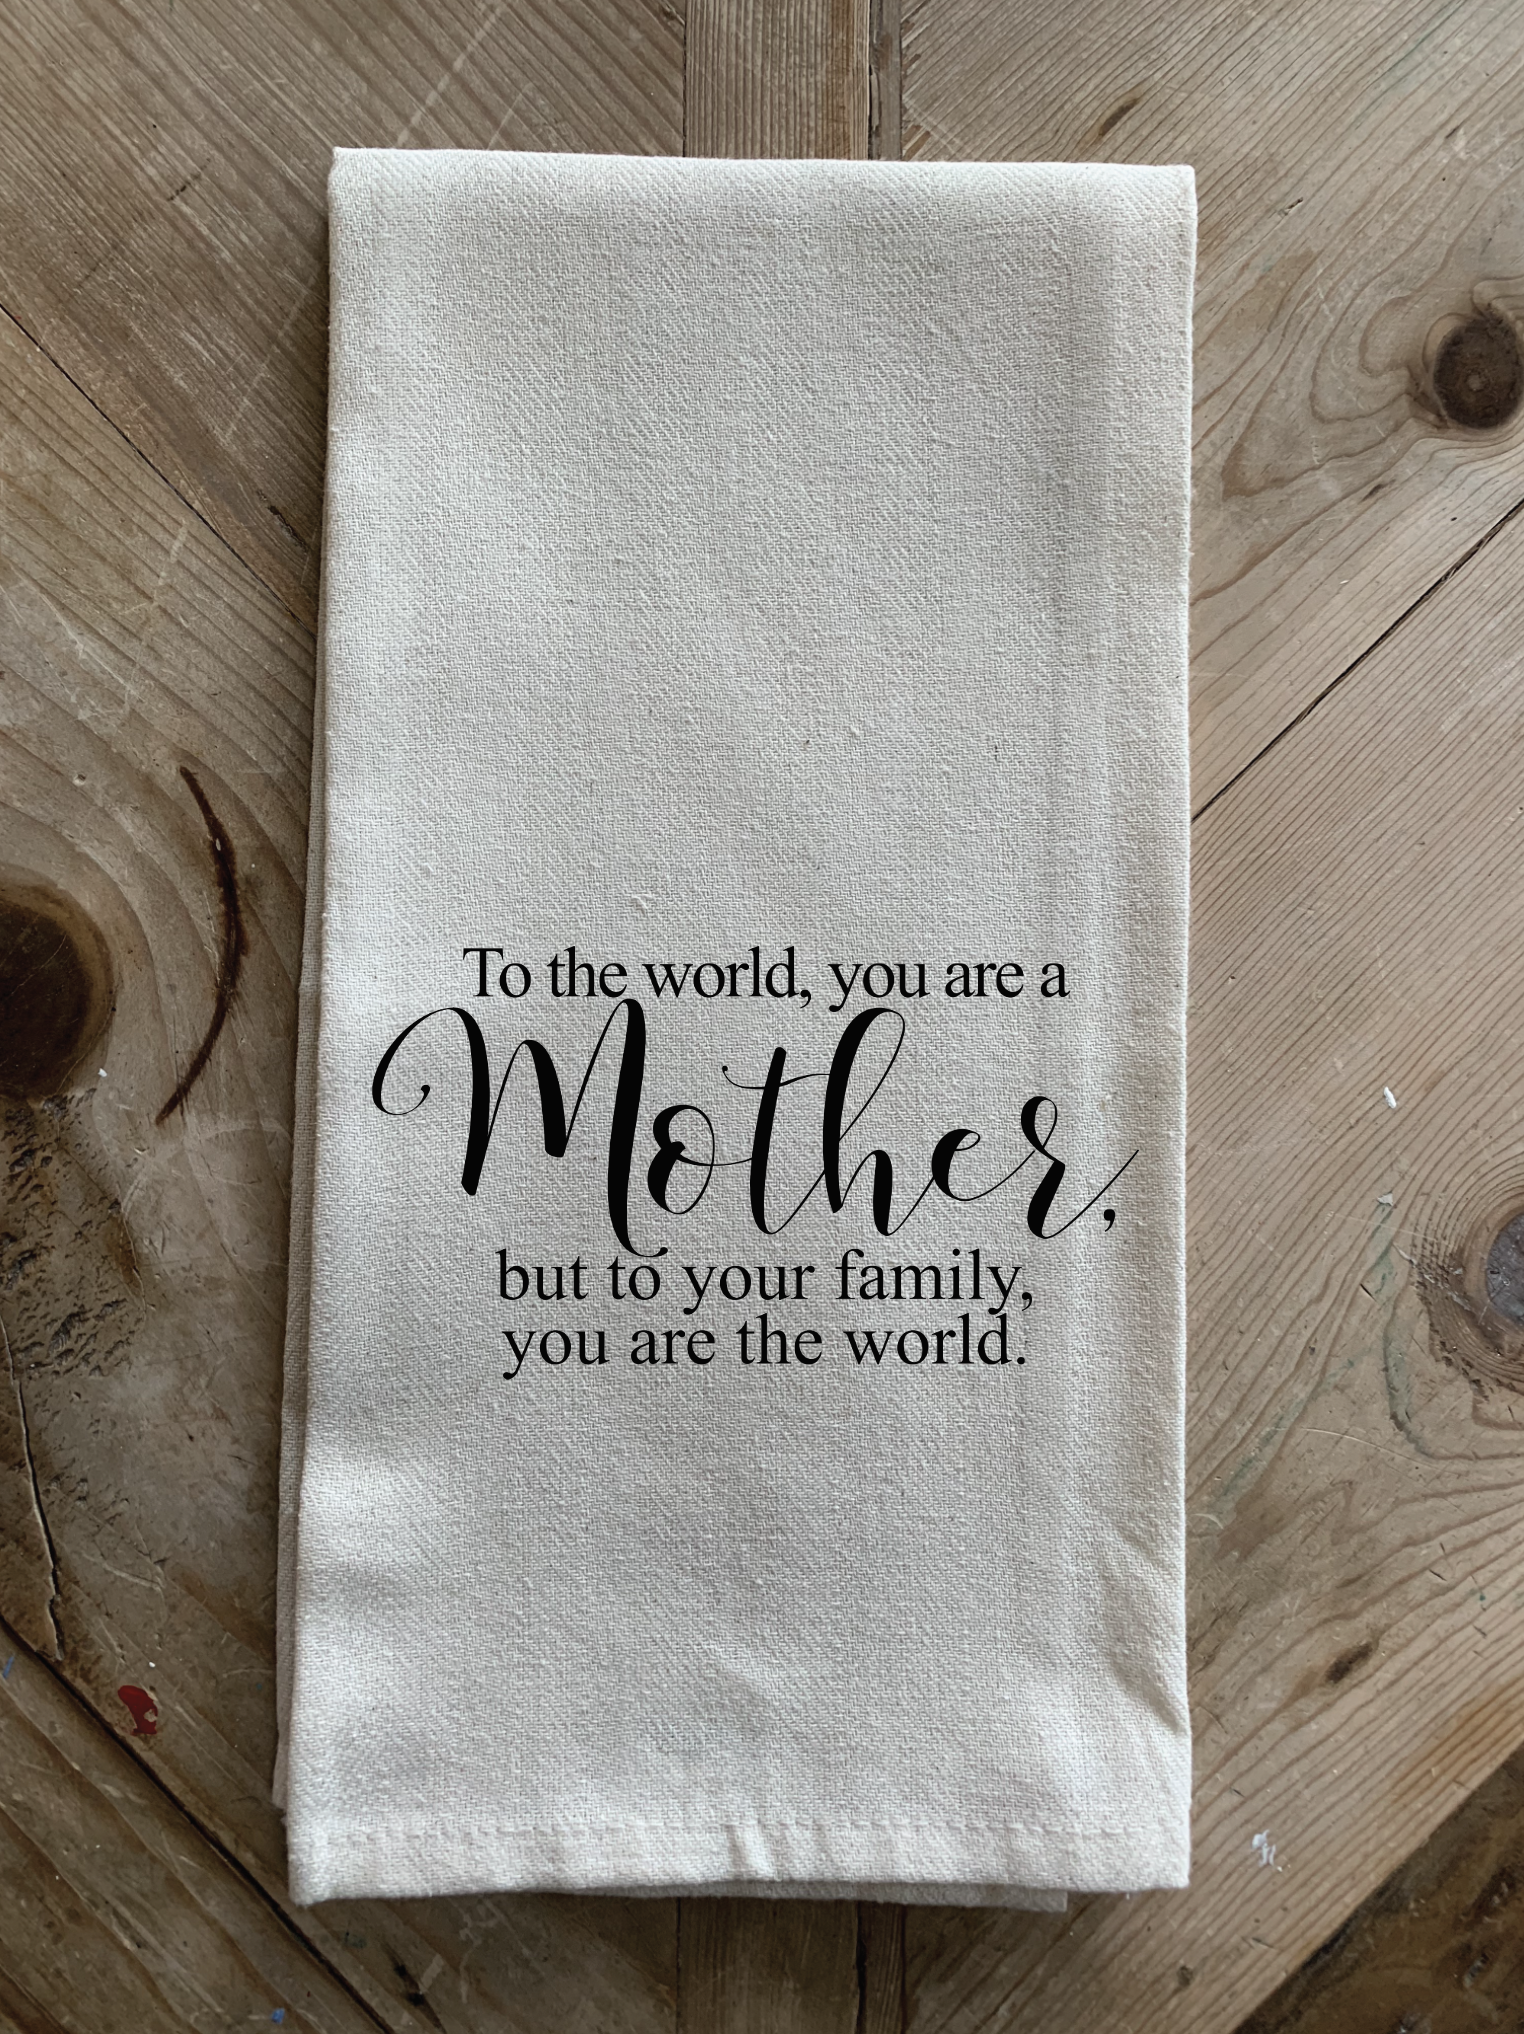 To the world, you are a mother, but to your family, you are the world.